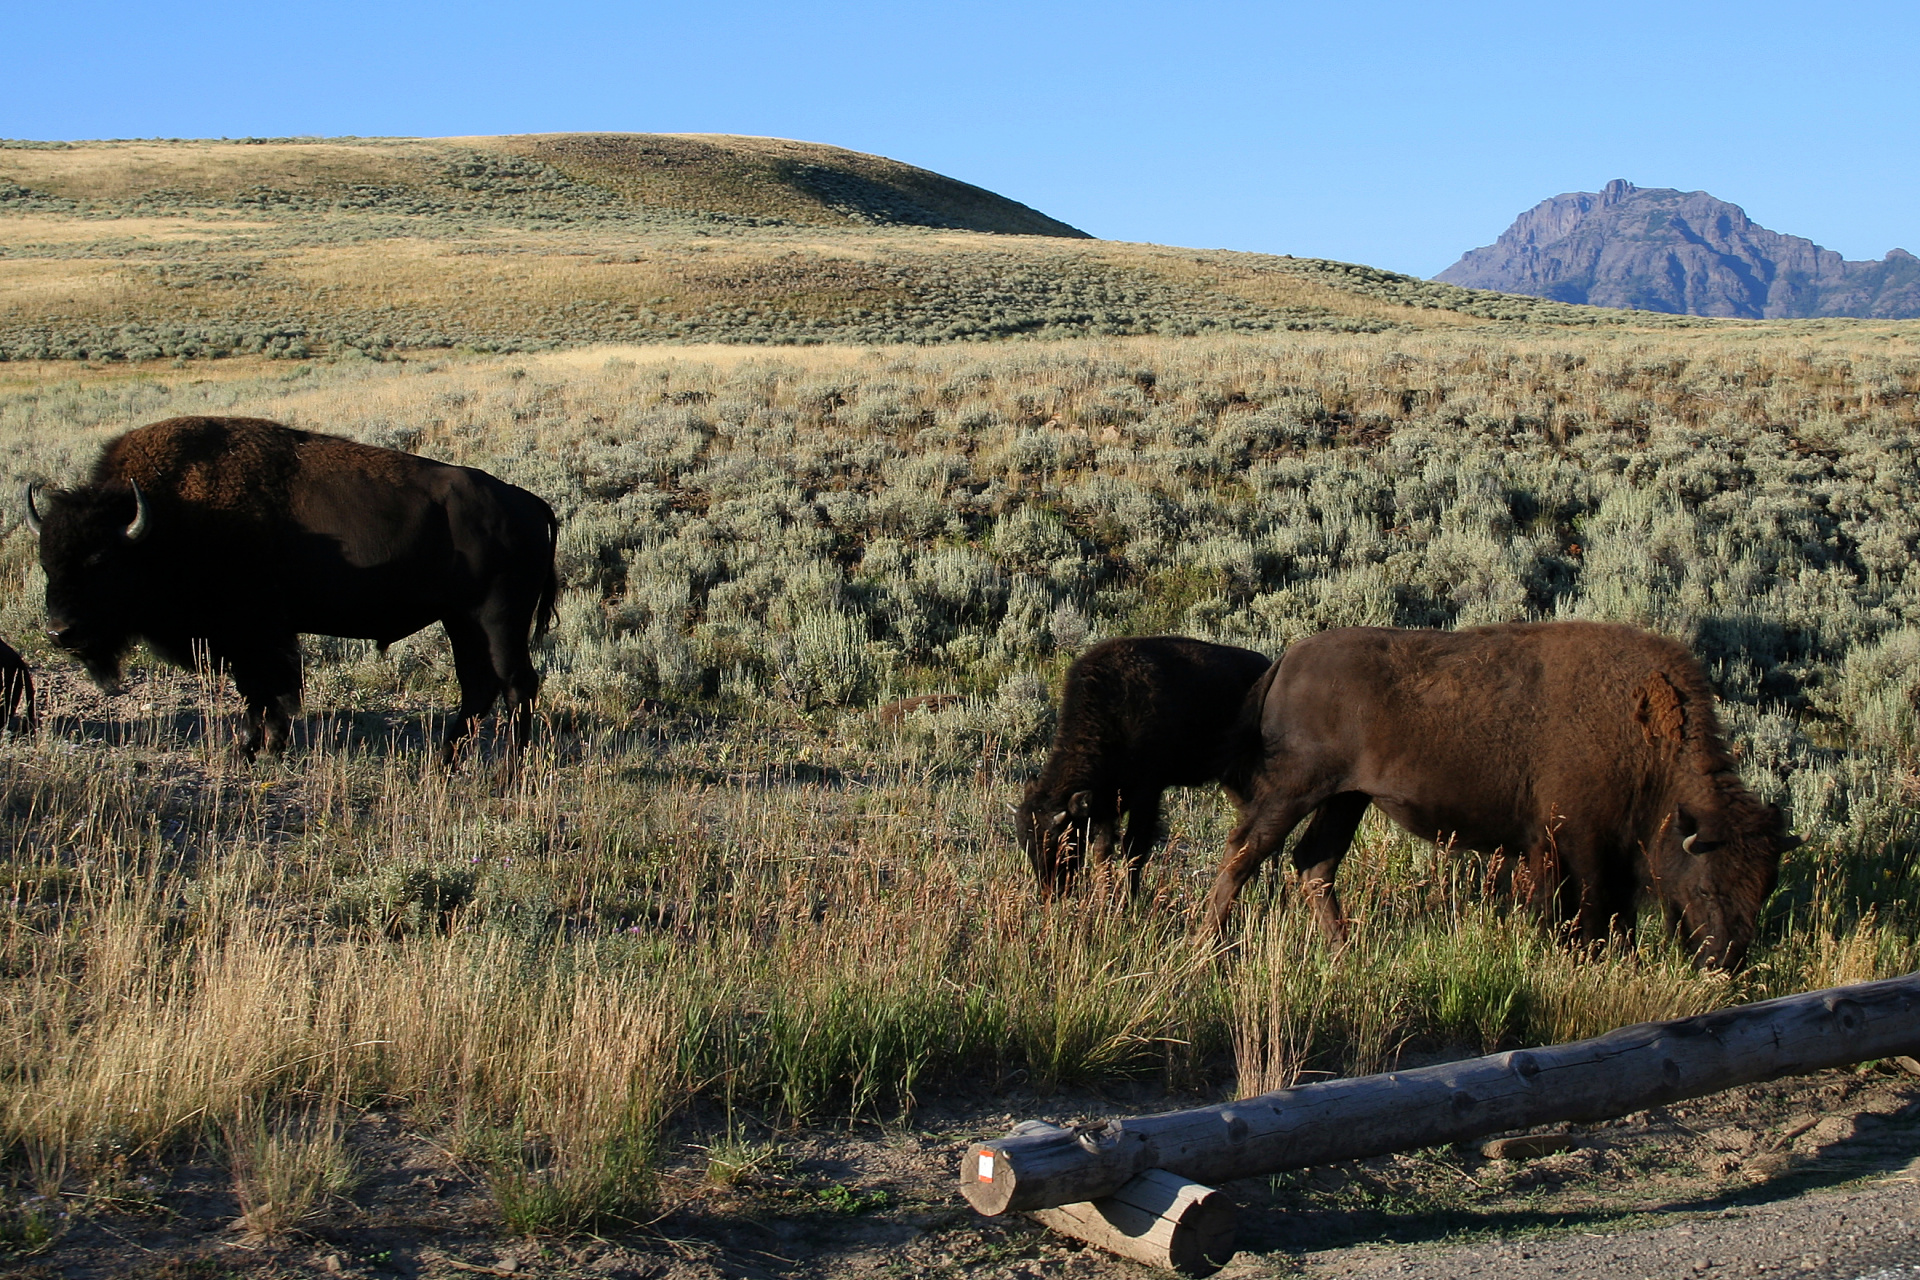 Third Herd (Travels » US Trip 1: Cheyenne Country » The Journey » Yellowstone National Park » Buffalos)